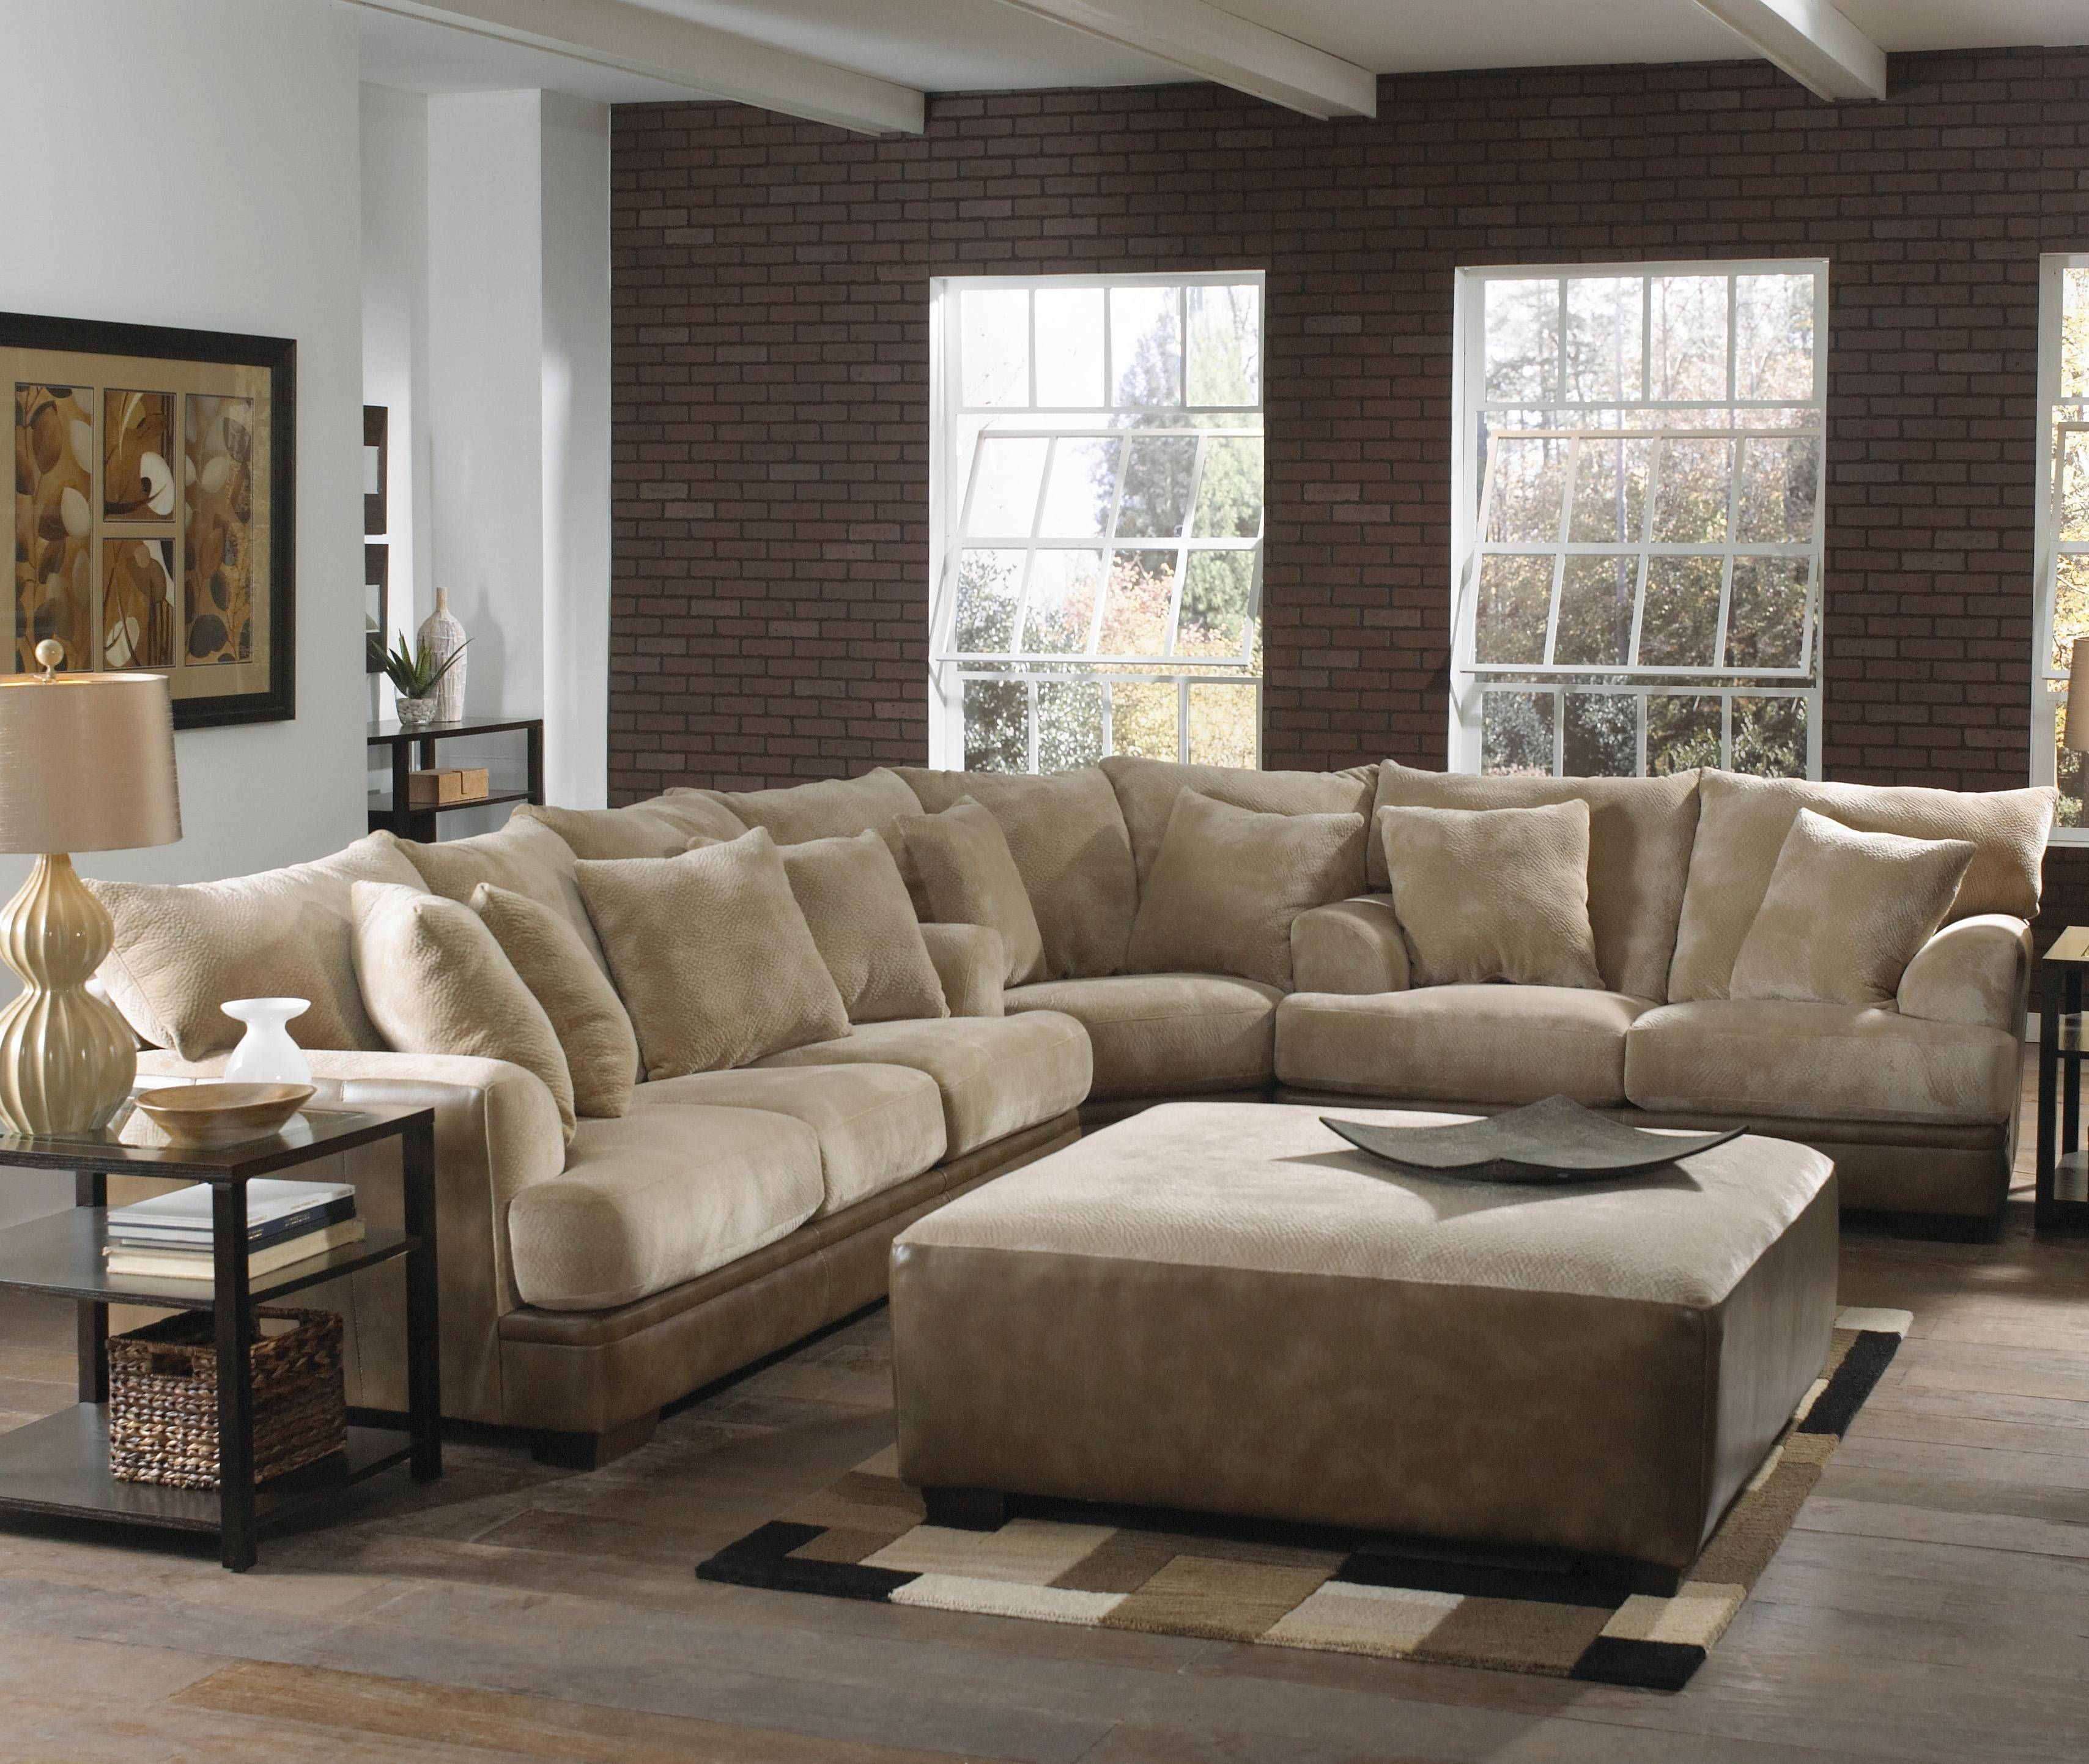 Sectional Leather Sofas Toronto | Crepeloversca Within Leather Sectional Sofas Toronto (View 21 of 25)